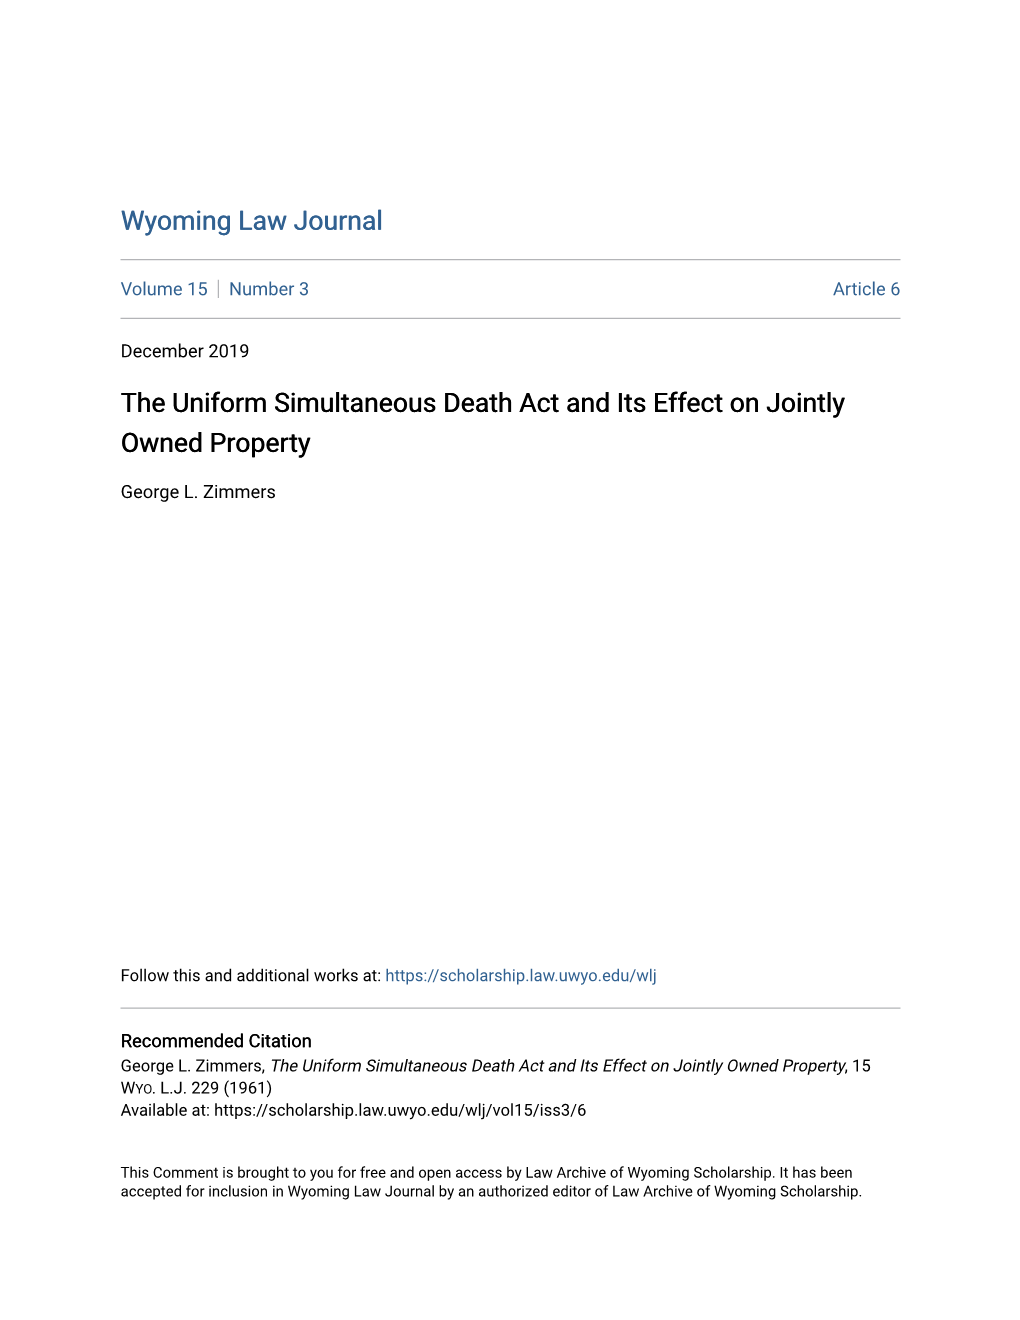 The Uniform Simultaneous Death Act and Its Effect on Jointly Owned Property